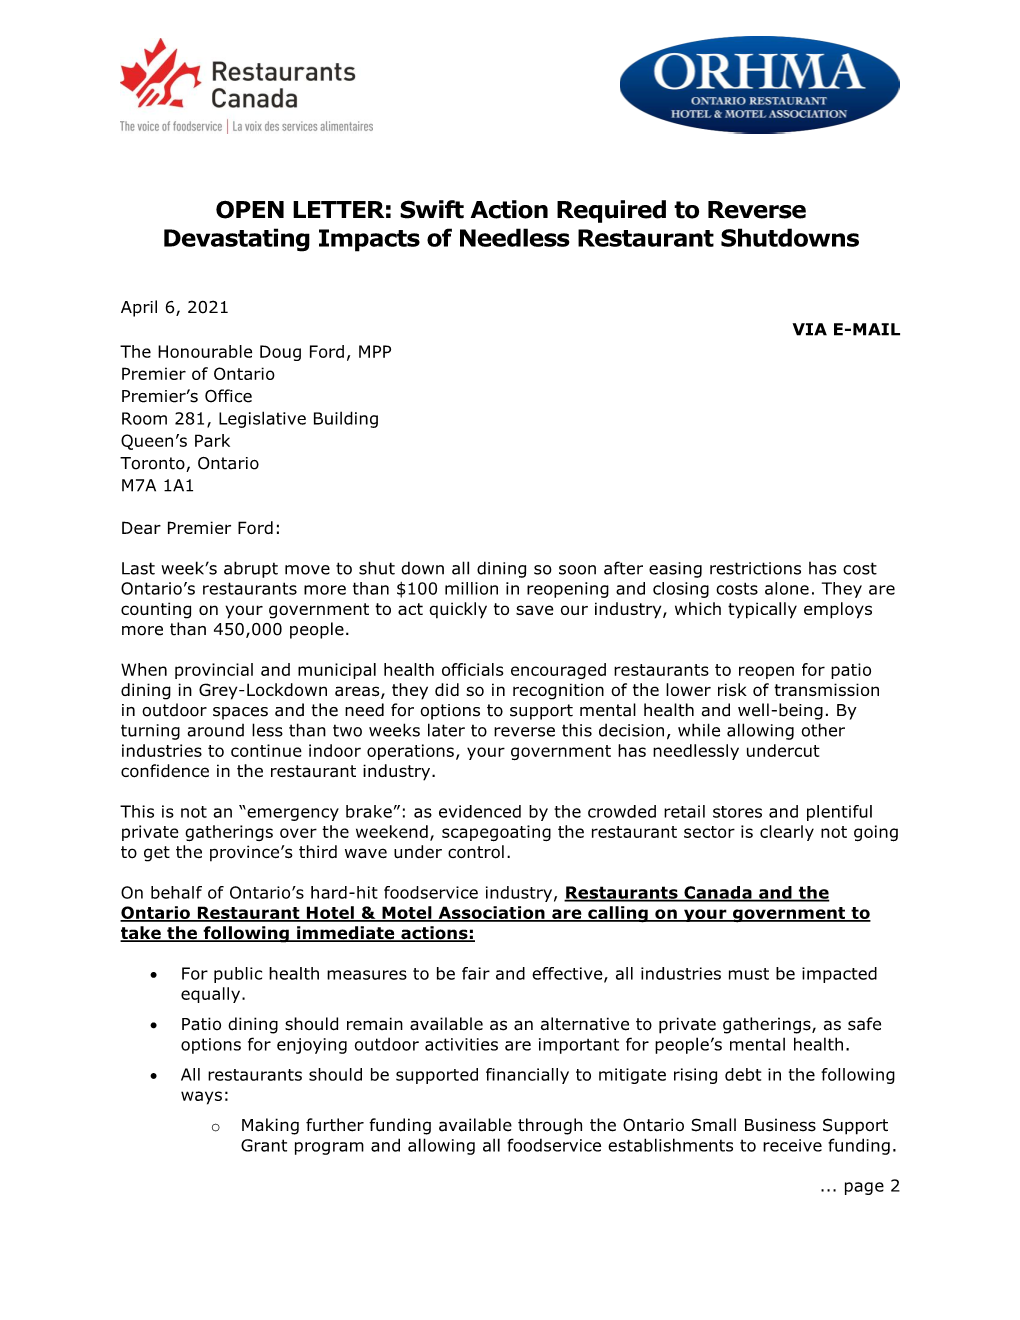 OPEN LETTER: Swift Action Required to Reverse Devastating Impacts of Needless Restaurant Shutdowns